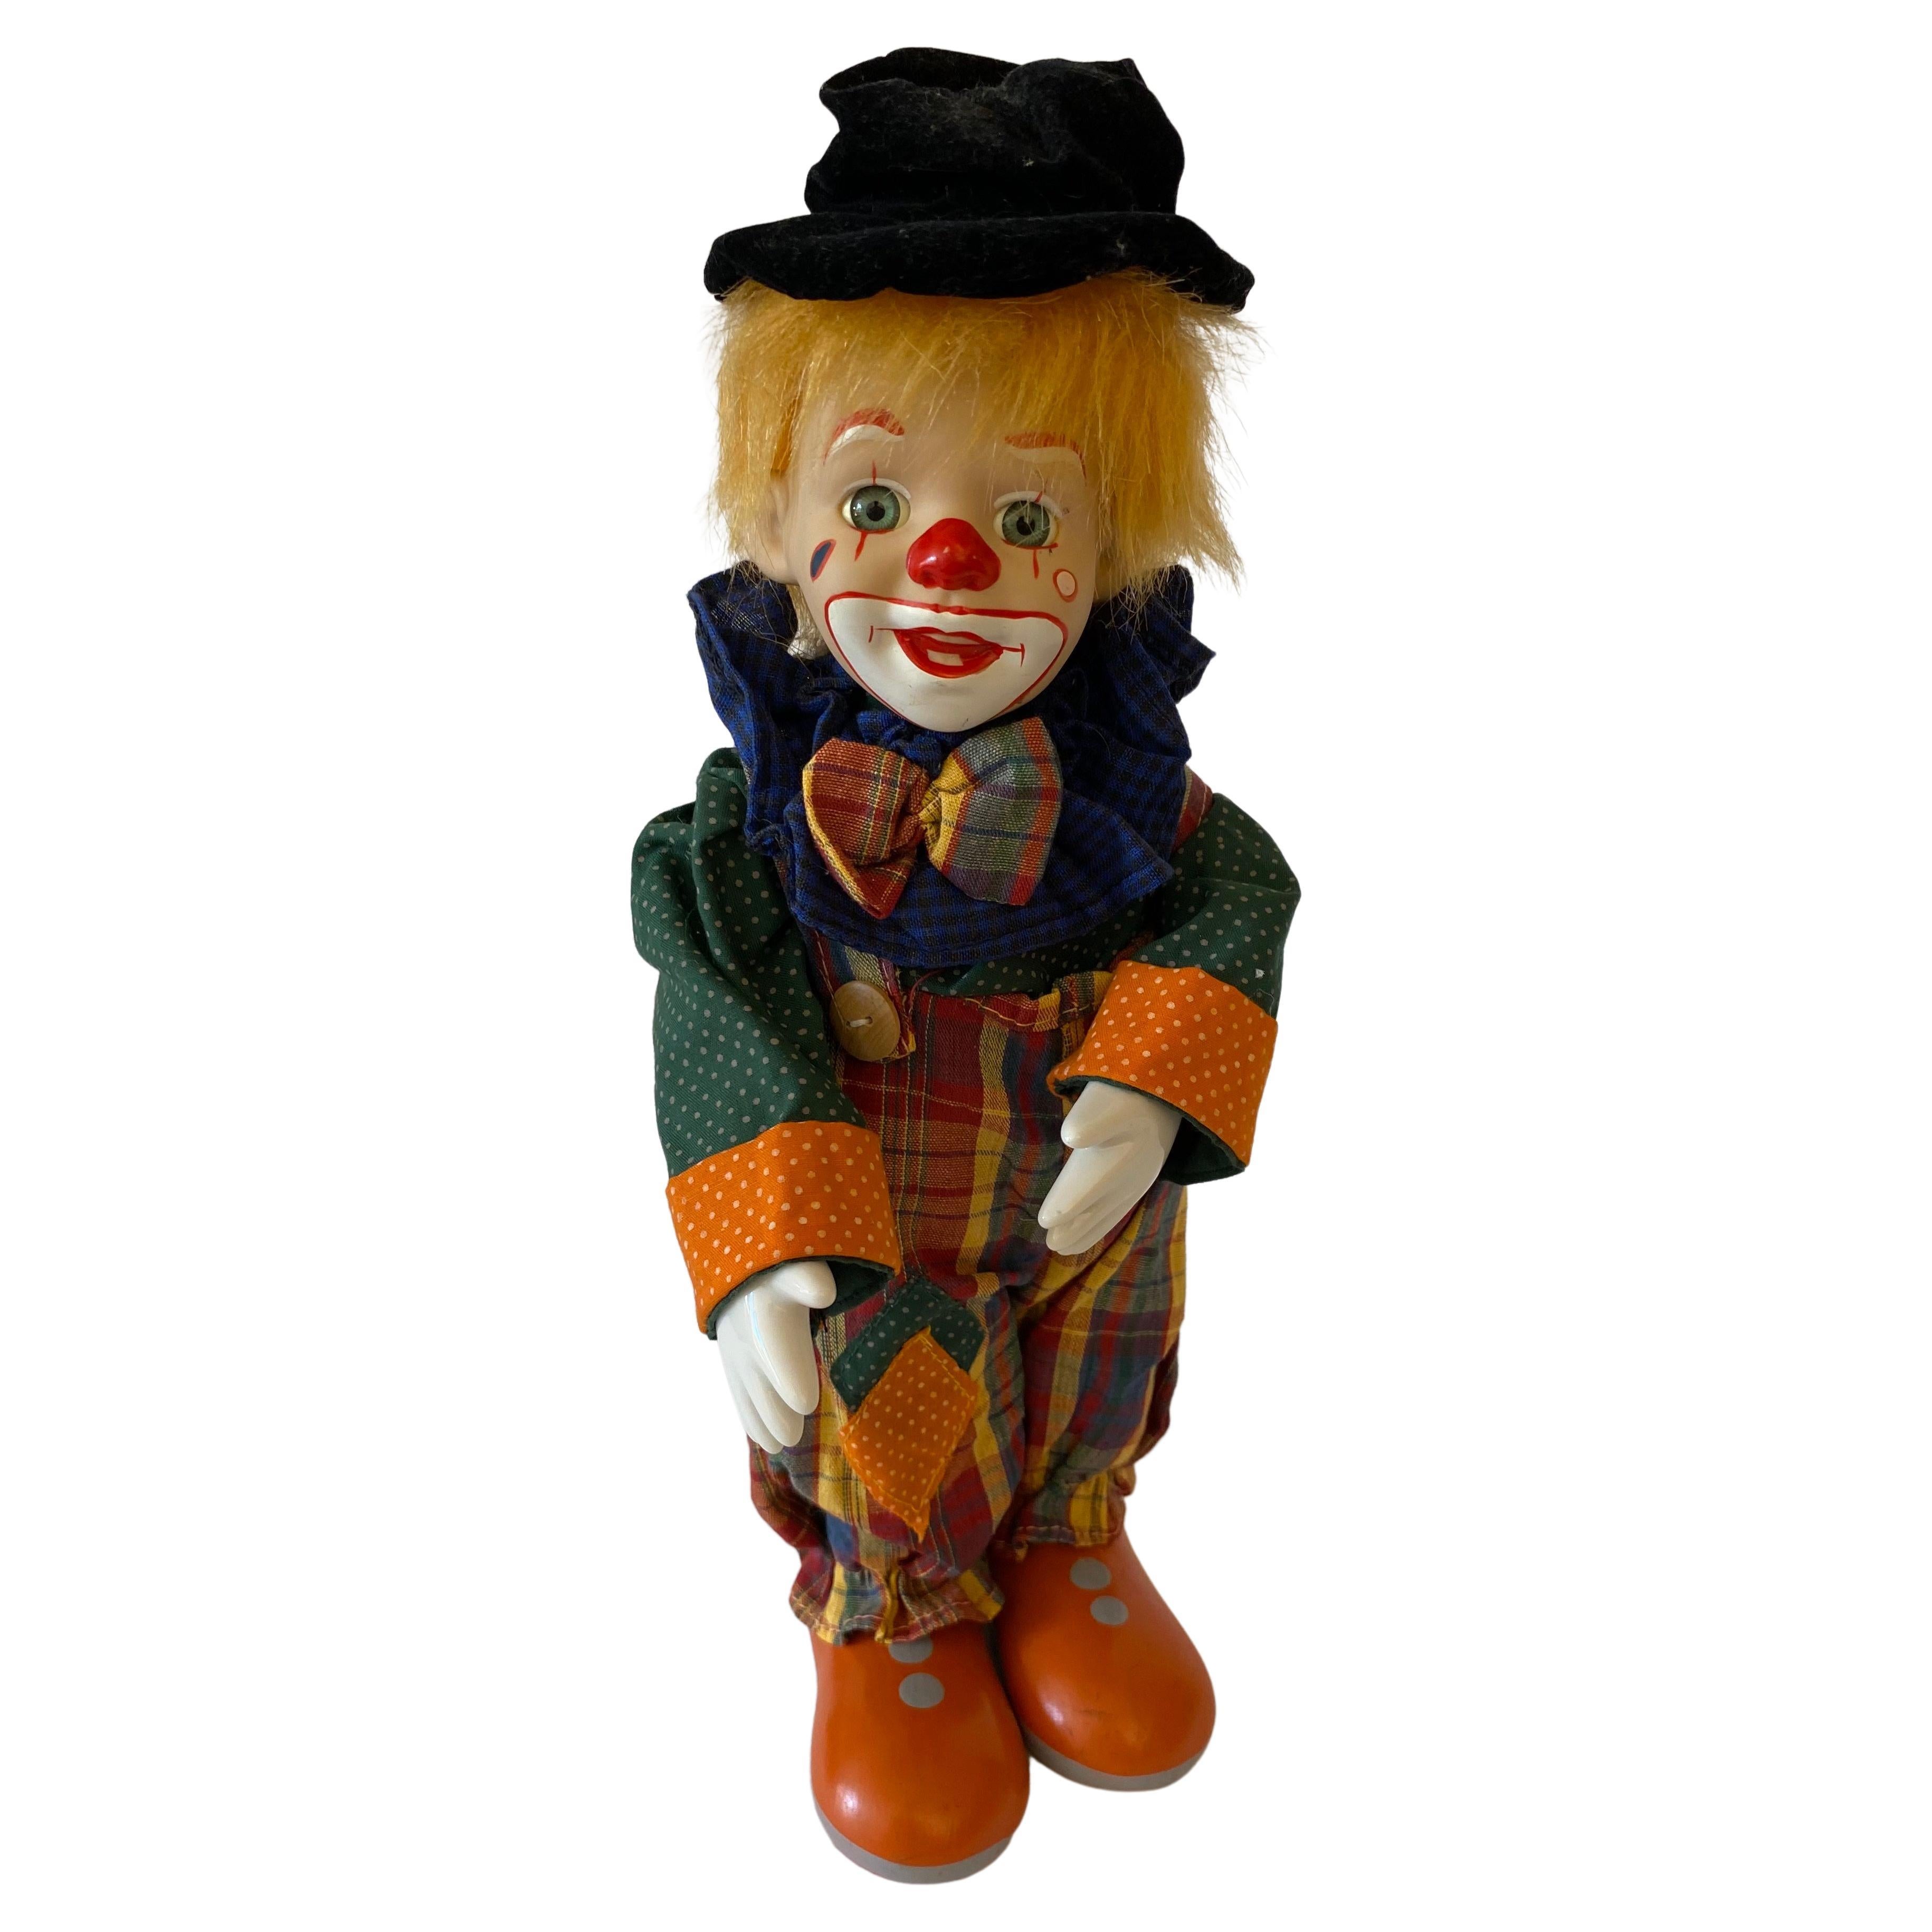 Adorable and Therapeutic Musical Clown Automaton Figure Toy